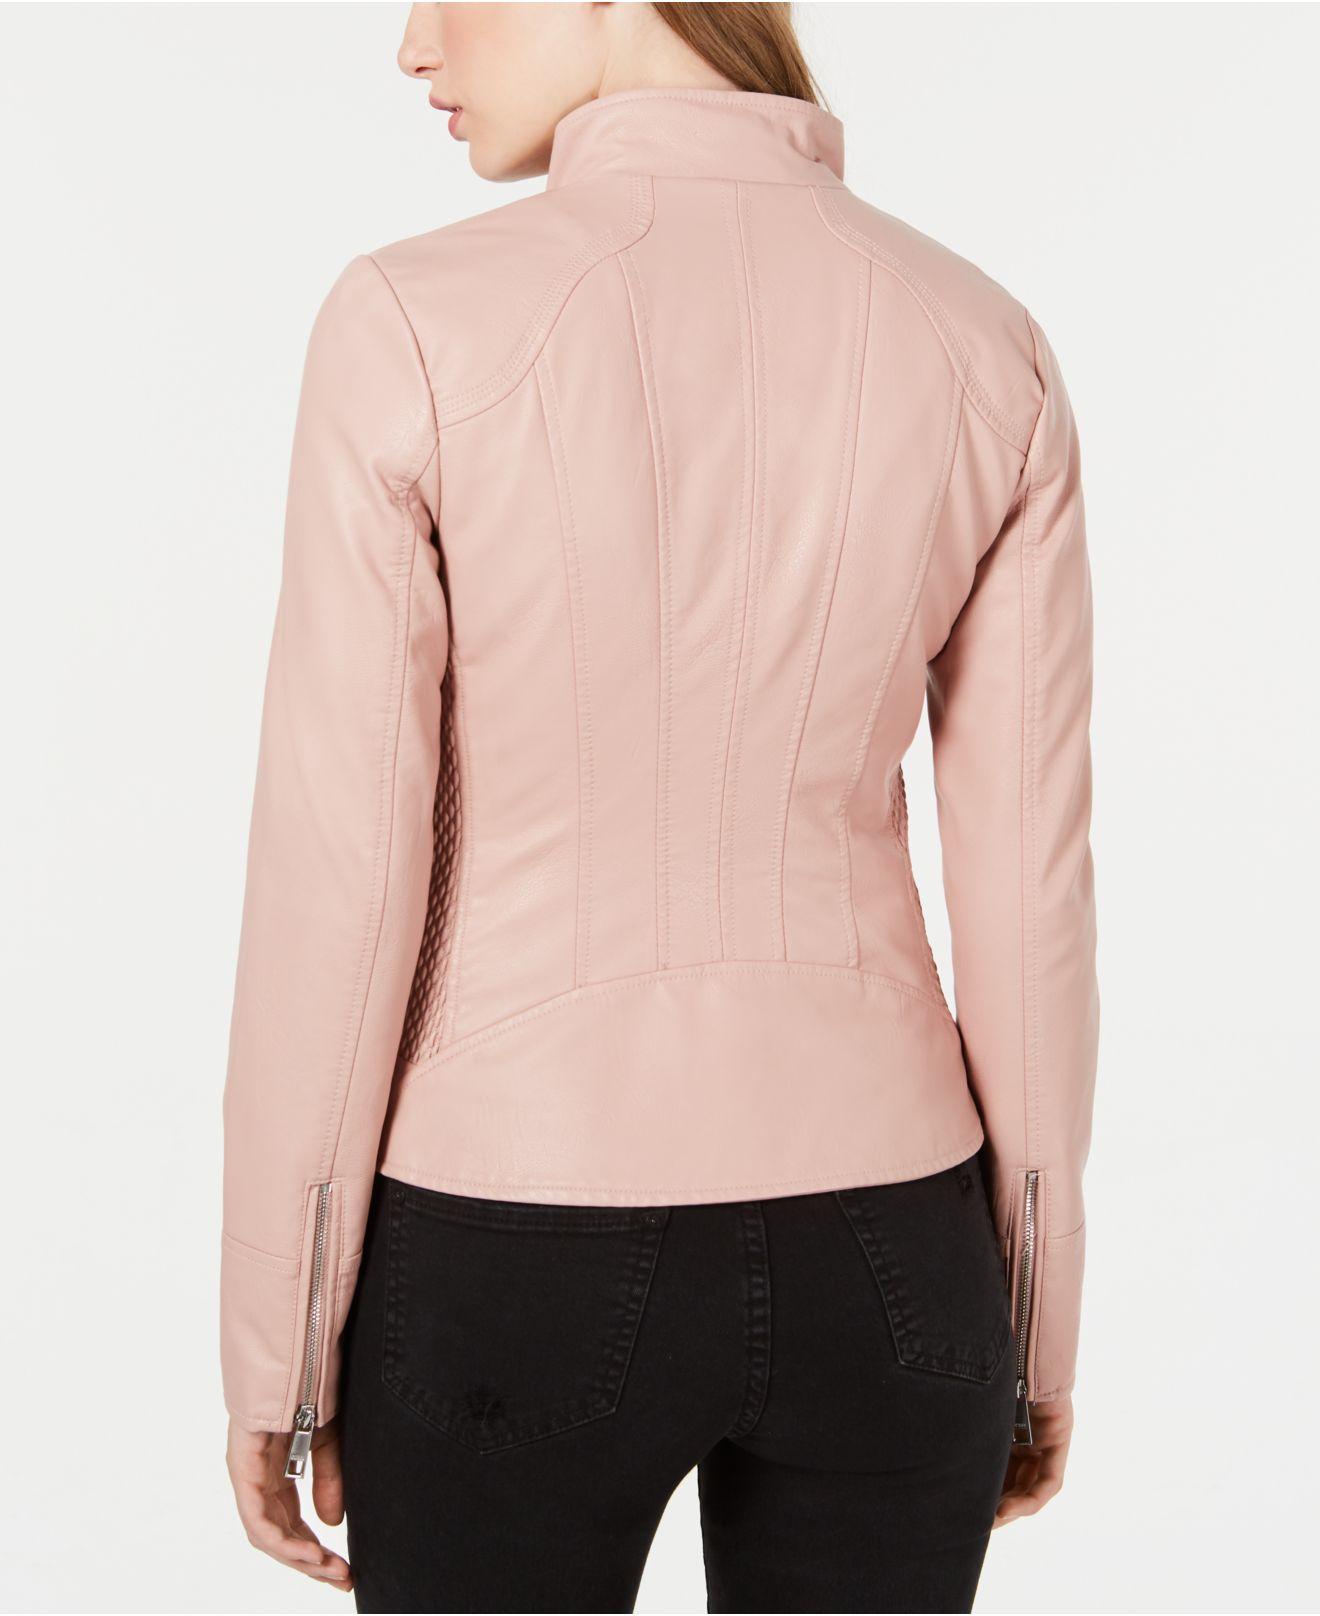 Guess Front Zip Faux-leather Jacket in Dusty Pink (Pink) - Lyst